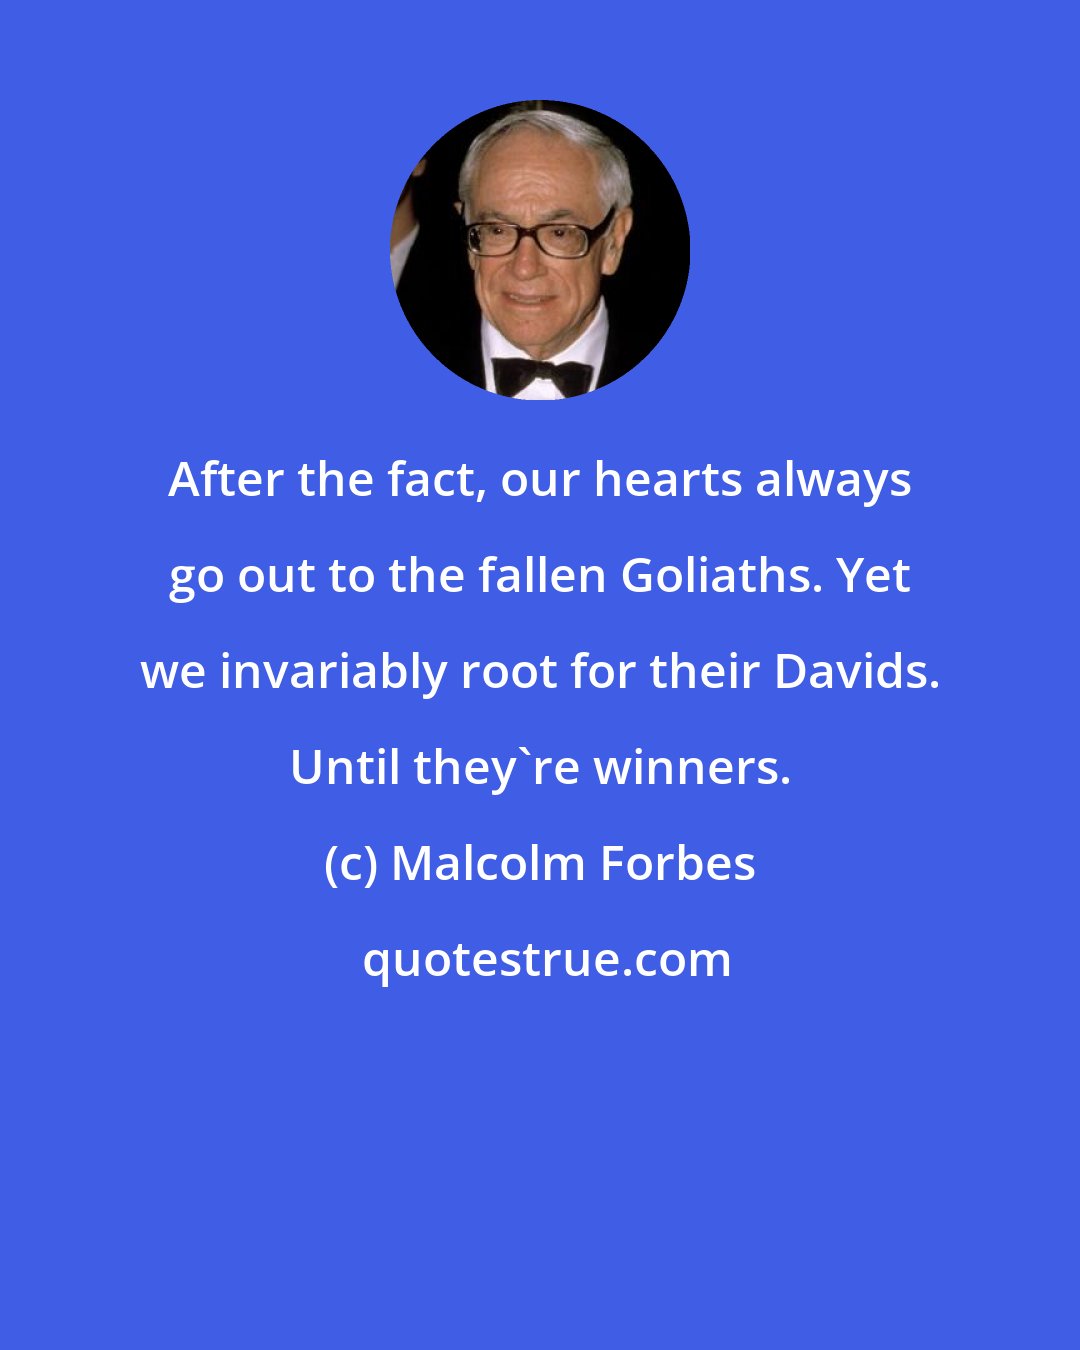 Malcolm Forbes: After the fact, our hearts always go out to the fallen Goliaths. Yet we invariably root for their Davids. Until they're winners.